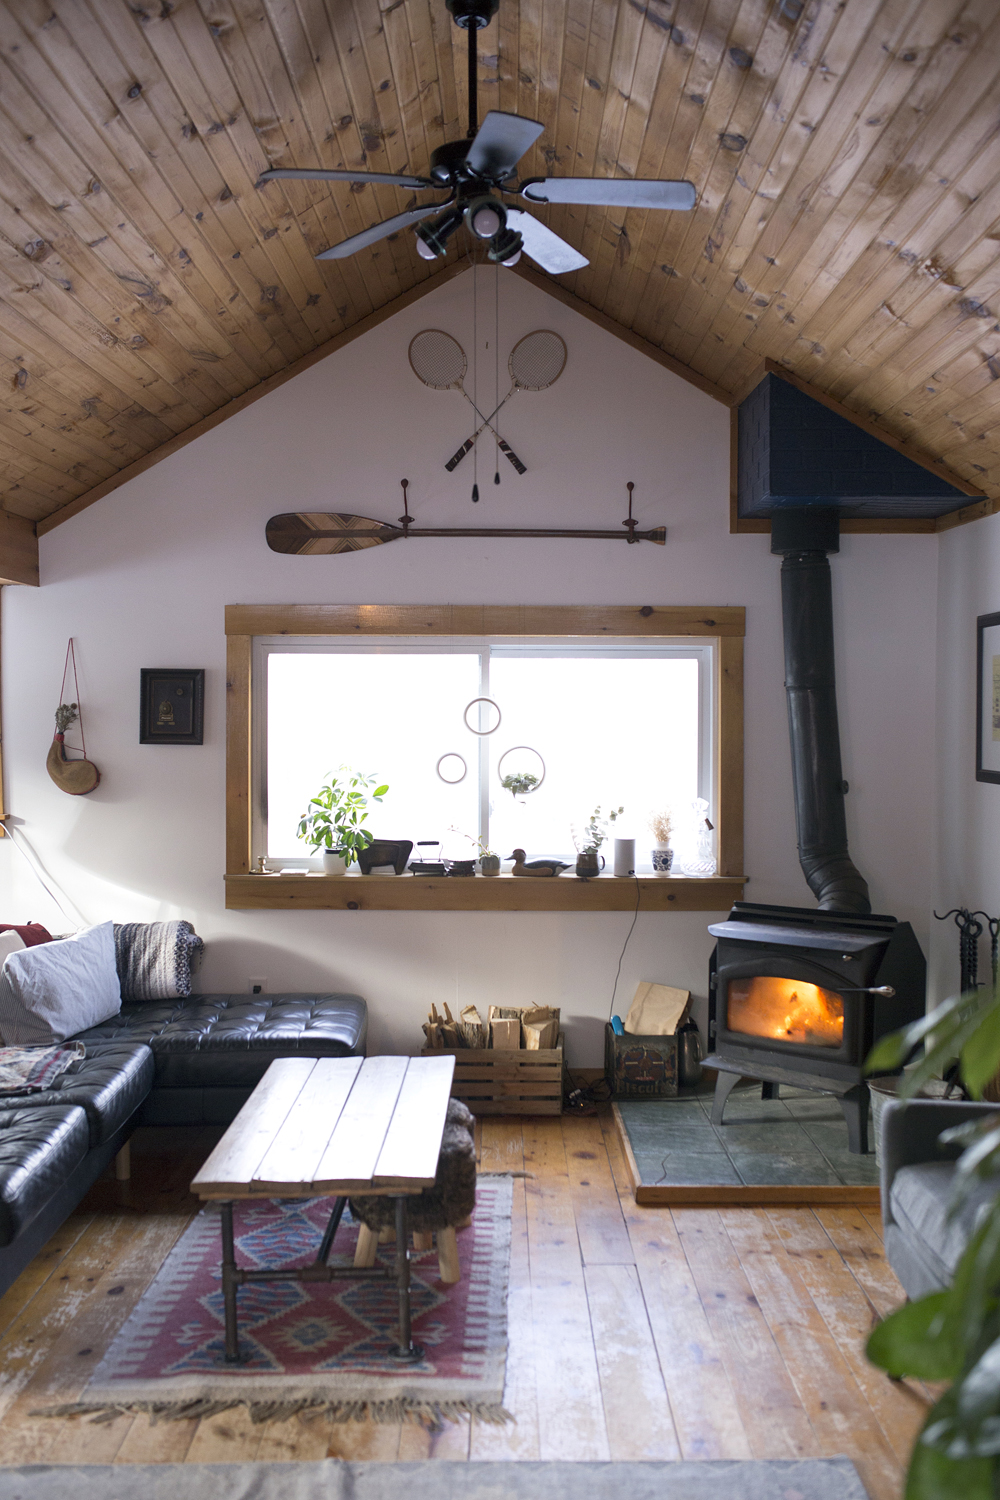 A cozy cottage with high sloped ceilings and a wood-burning fireplace